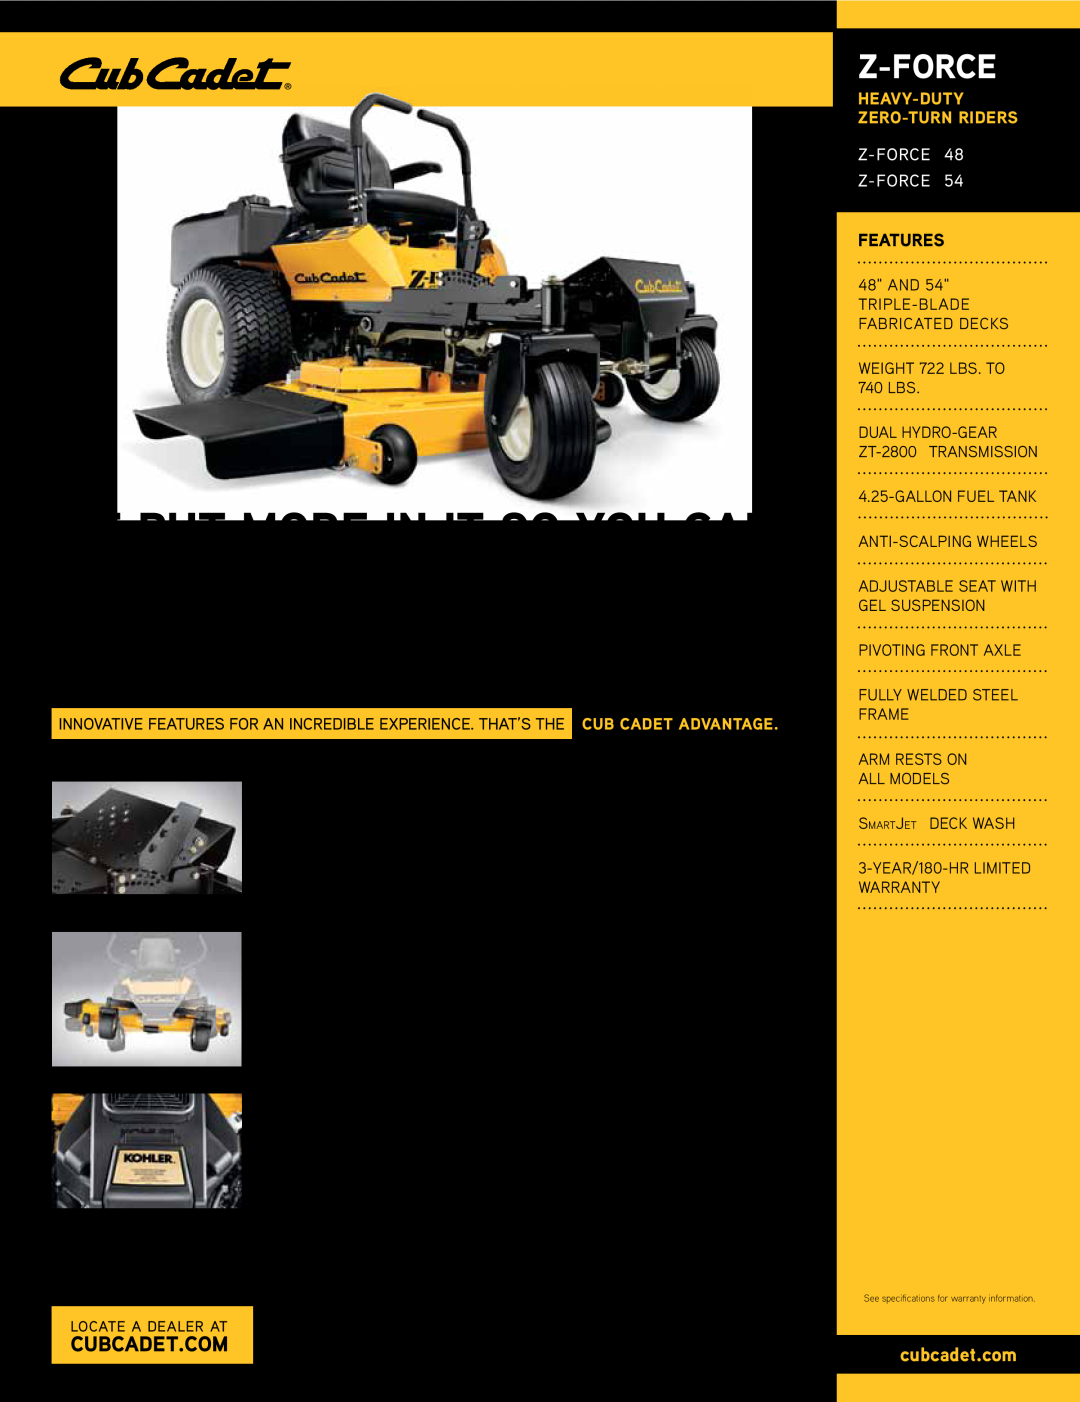 Cub Cadet M72, M48, M60 warranty Full Suspension Seat, about the many benefits of owning a Cub Cadet, they’ll be speechless 